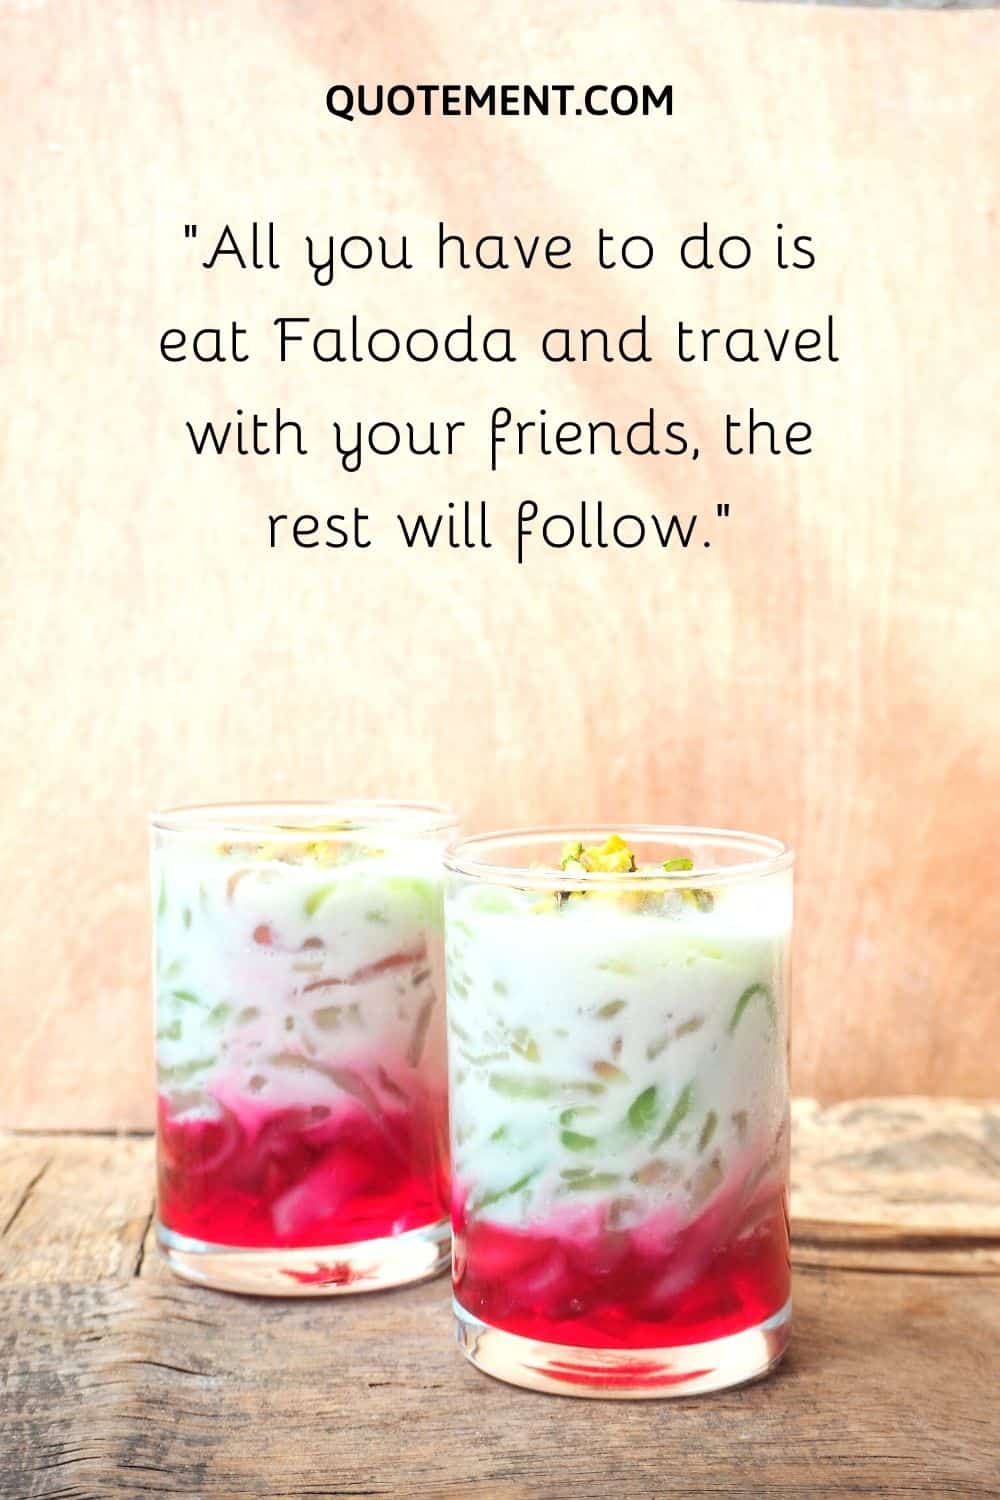 All you have to do is eat Falooda and travel with your friends